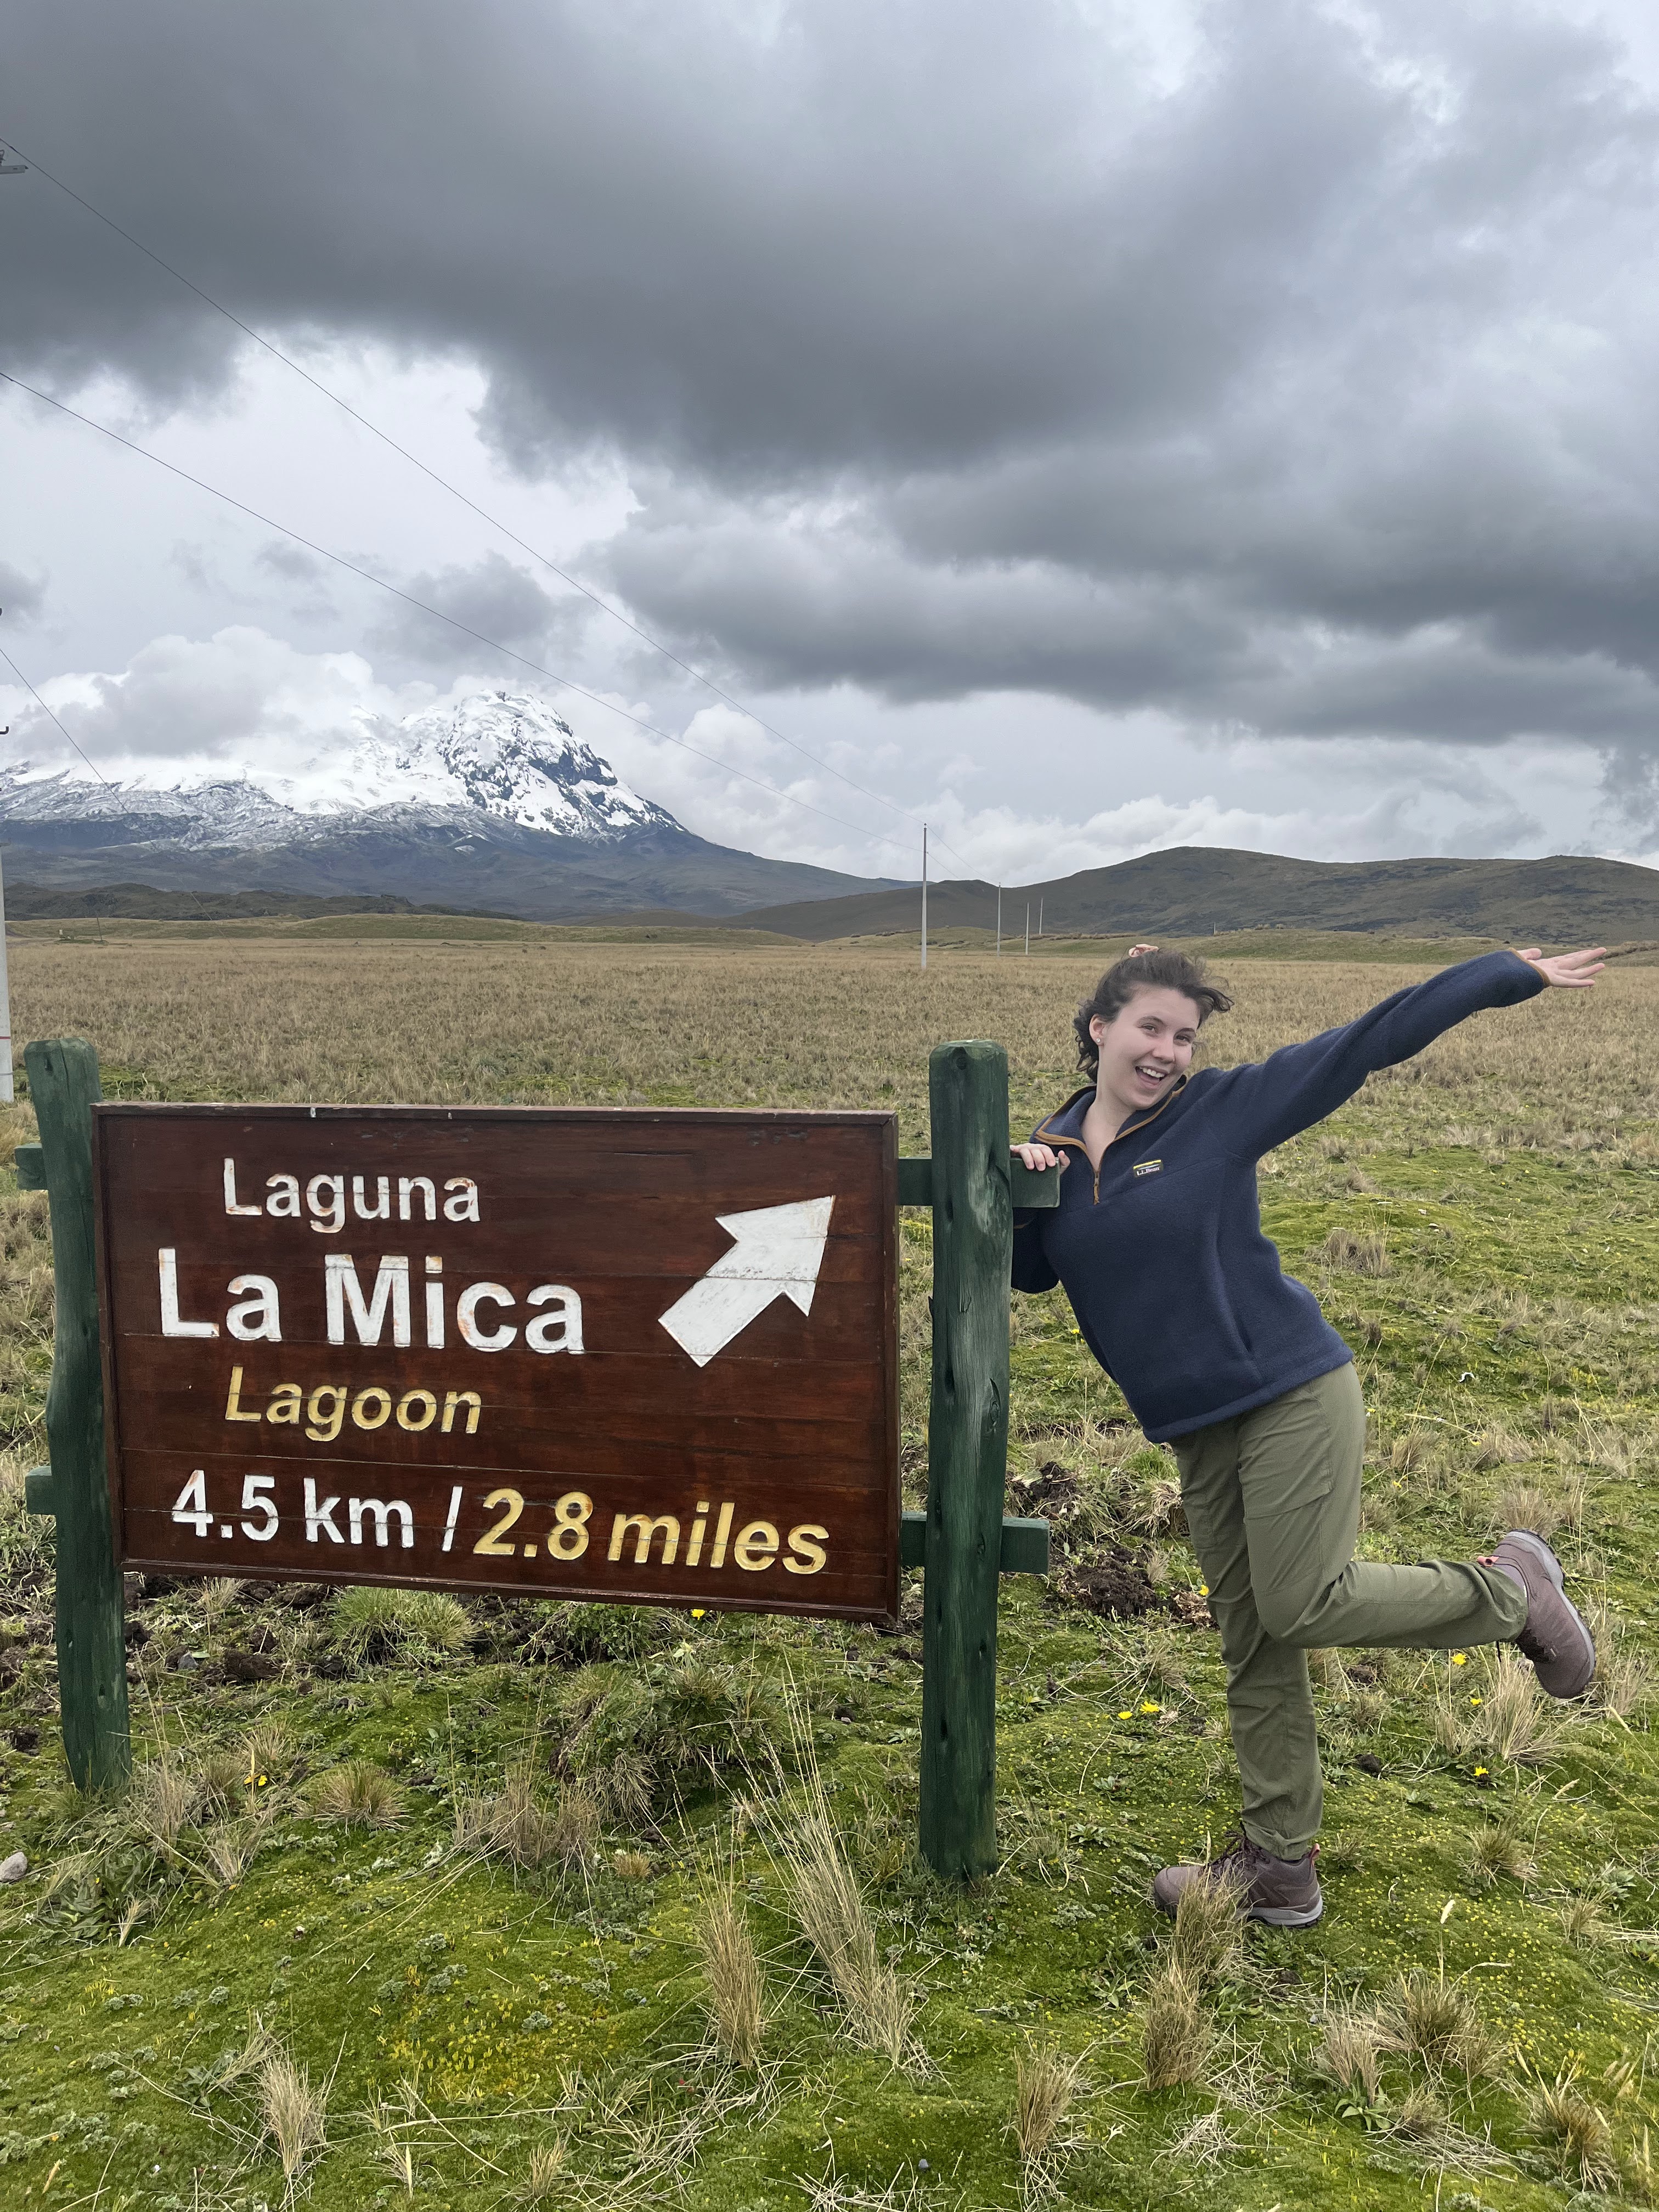 Emily stands on one foot with her arm outstretched against a sign that points toward the lagoon, with rolling hills behind her.